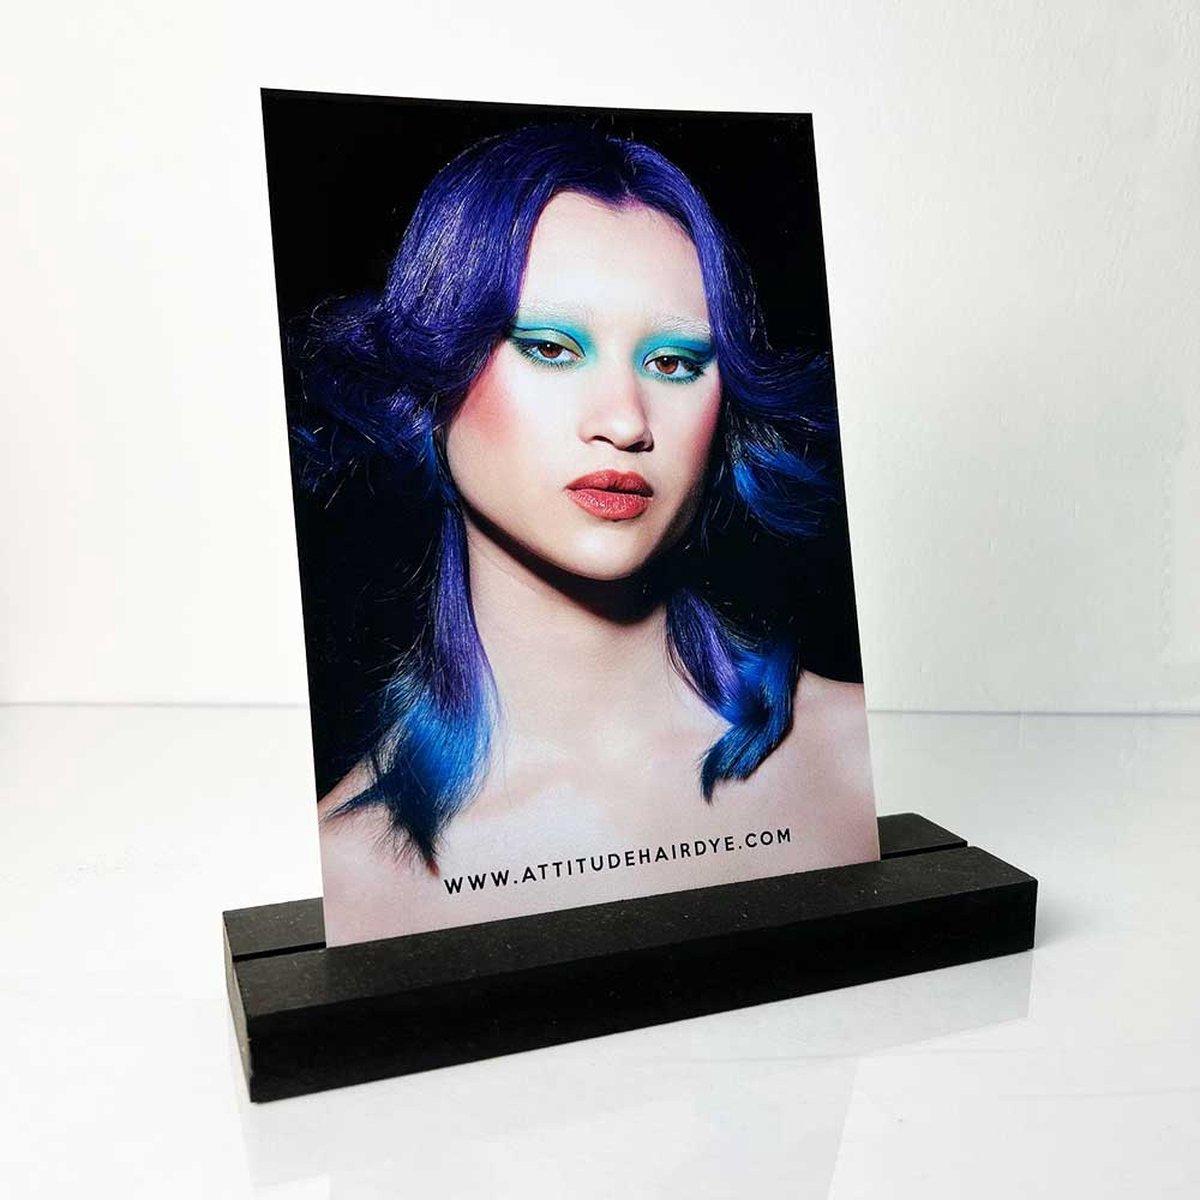 Attitude Hair Dye - 3-pcs/set double sided A5 cards Product display - Zwart